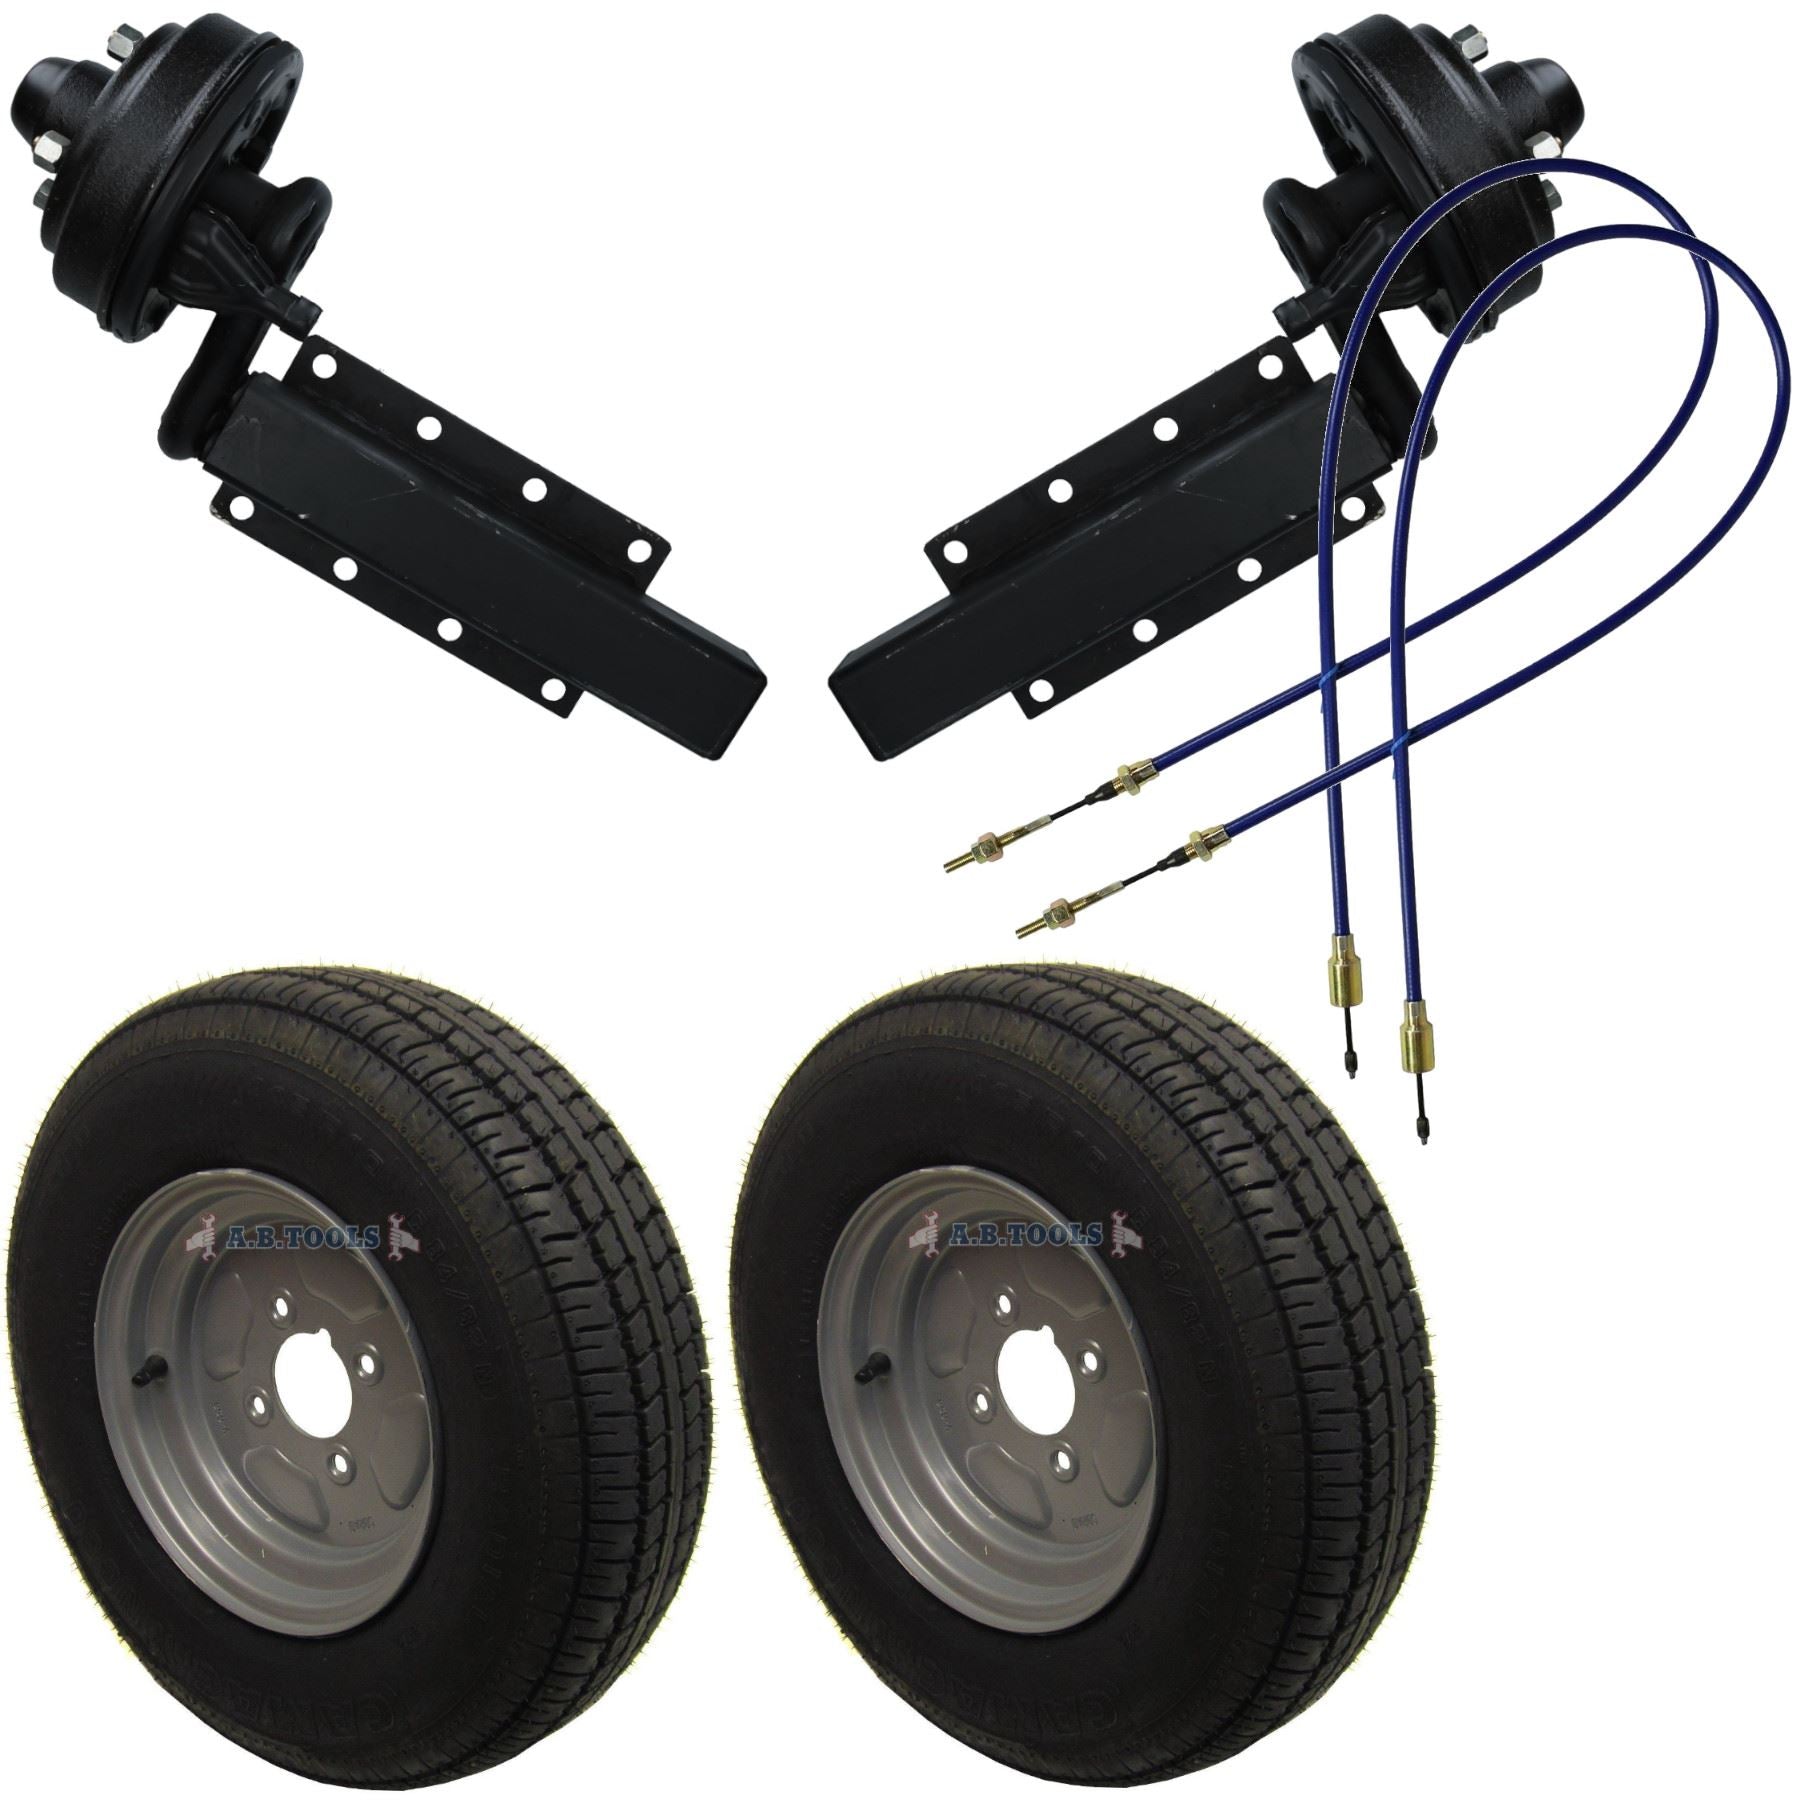 750kg Braked Trailer Suspension Units with 10" Wheels & Tyres Brake Cables